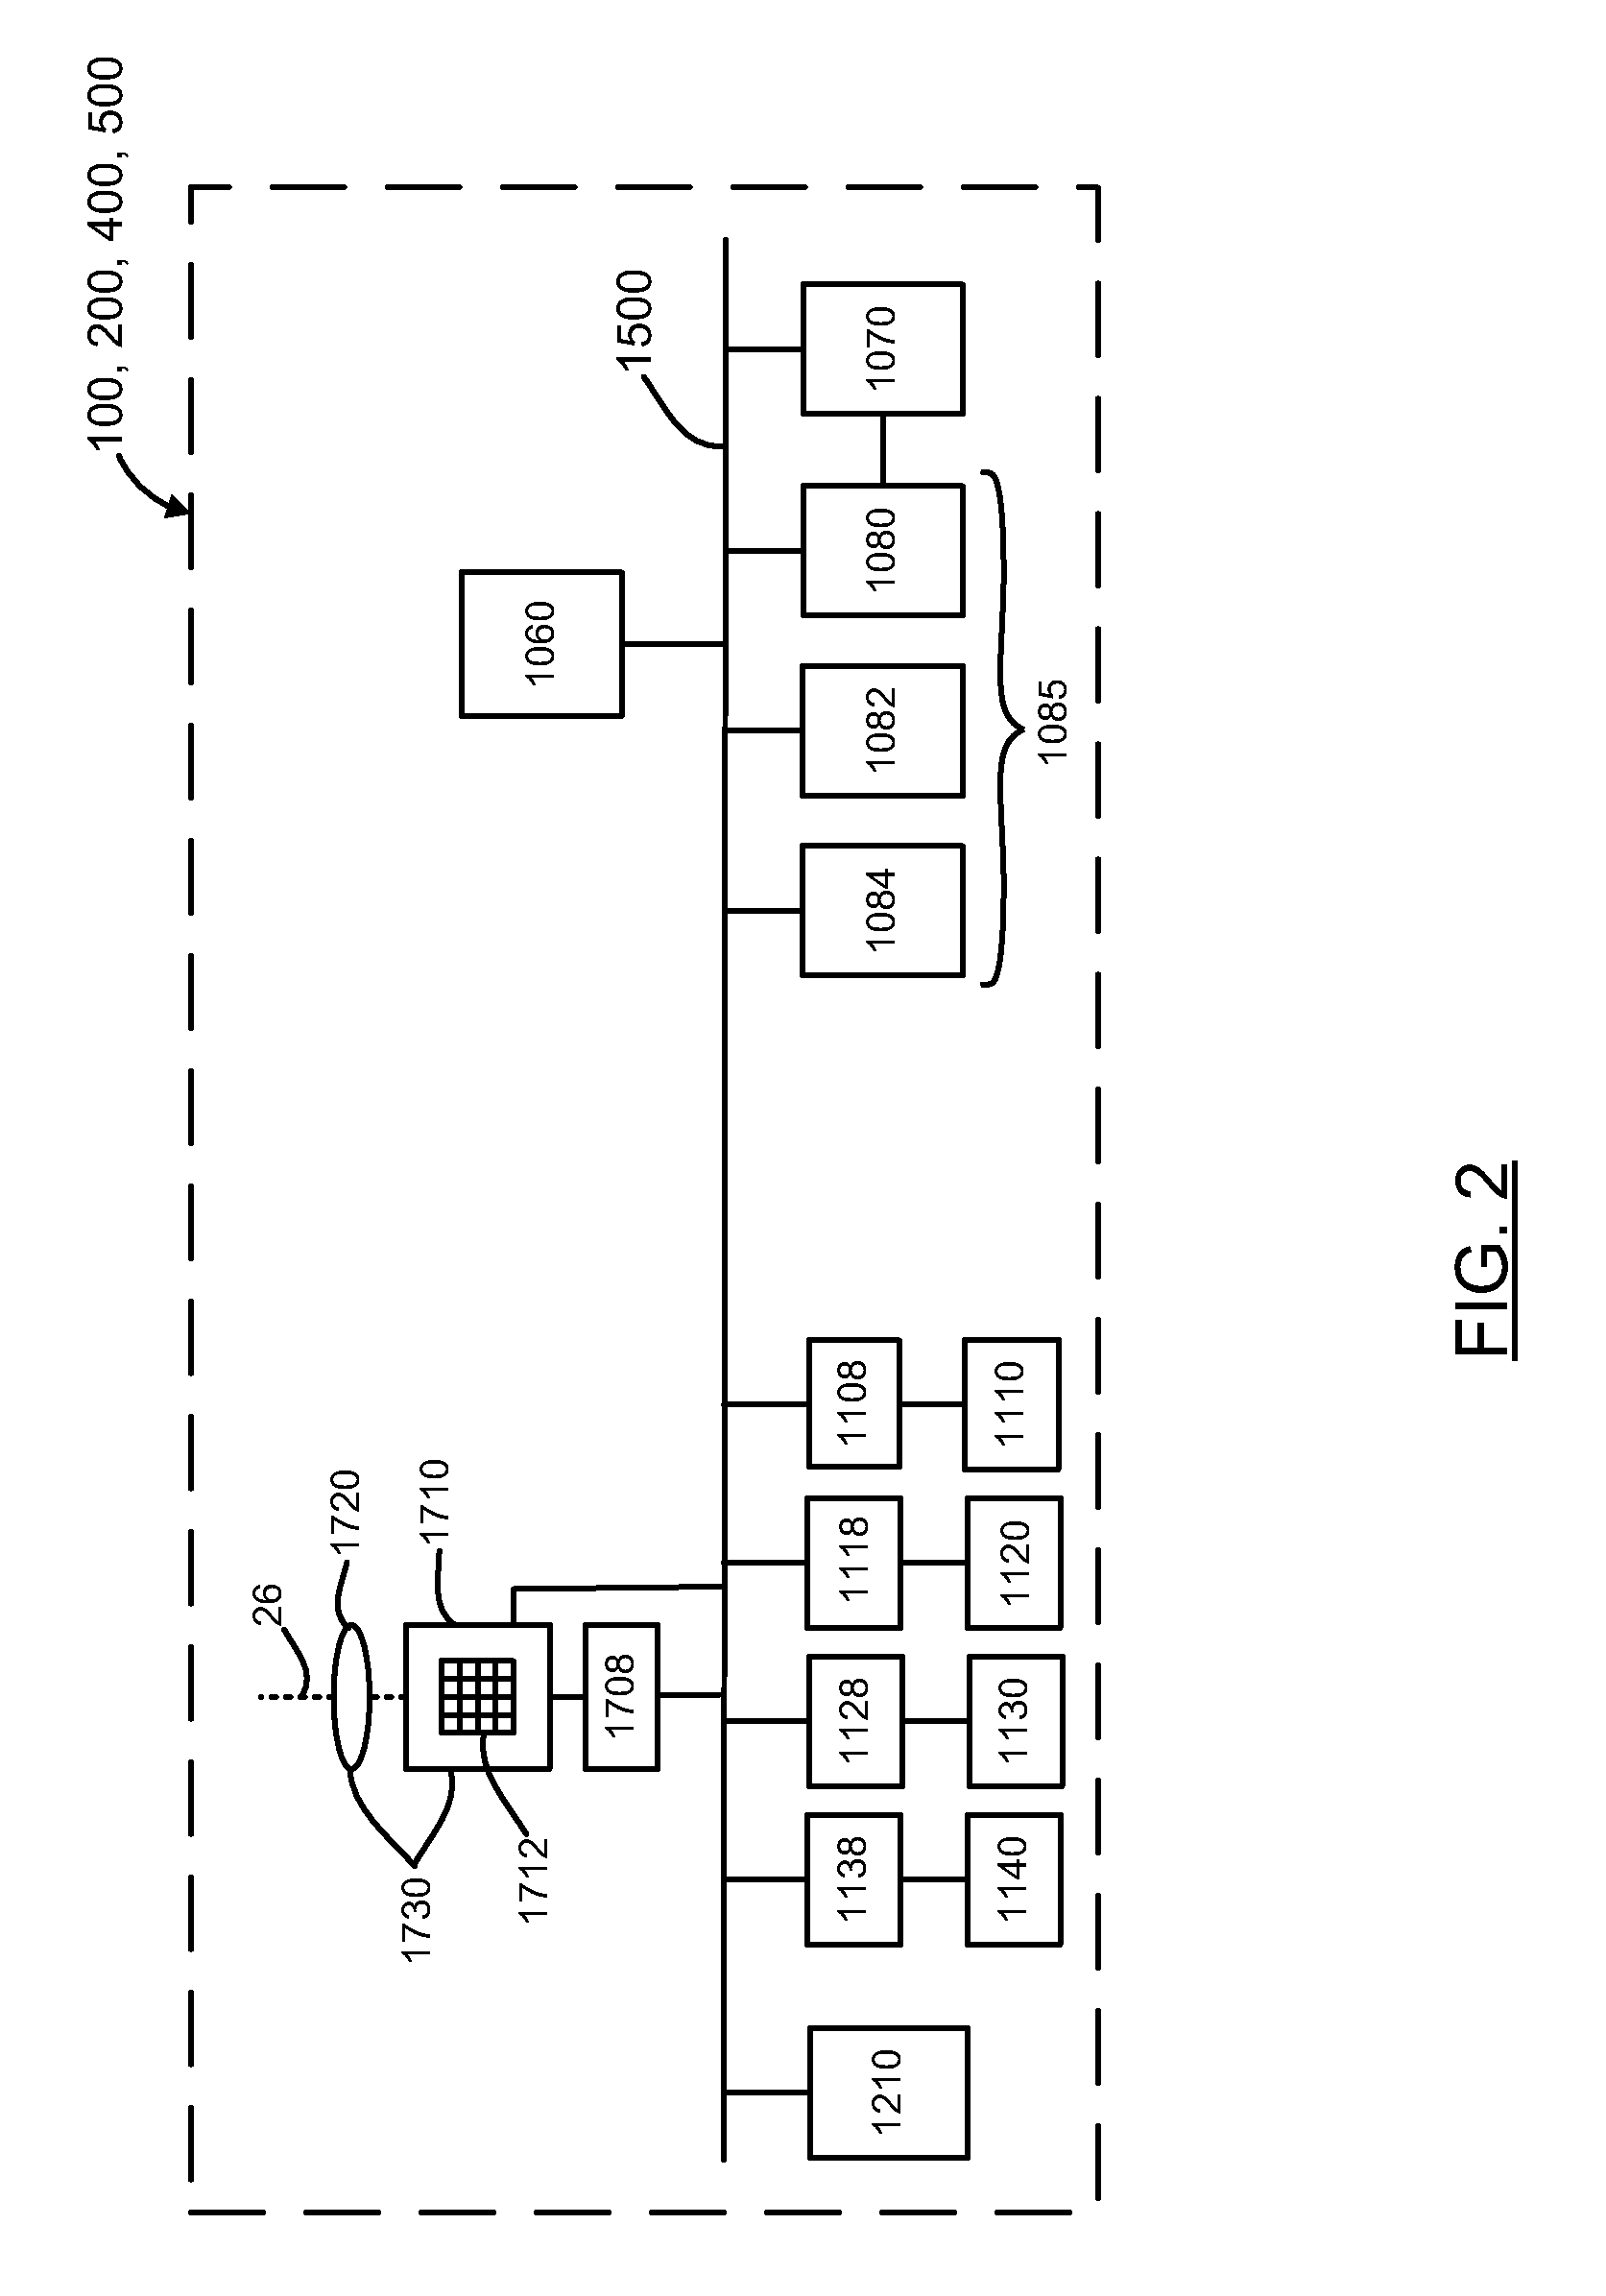 Method and system operative to process color image data